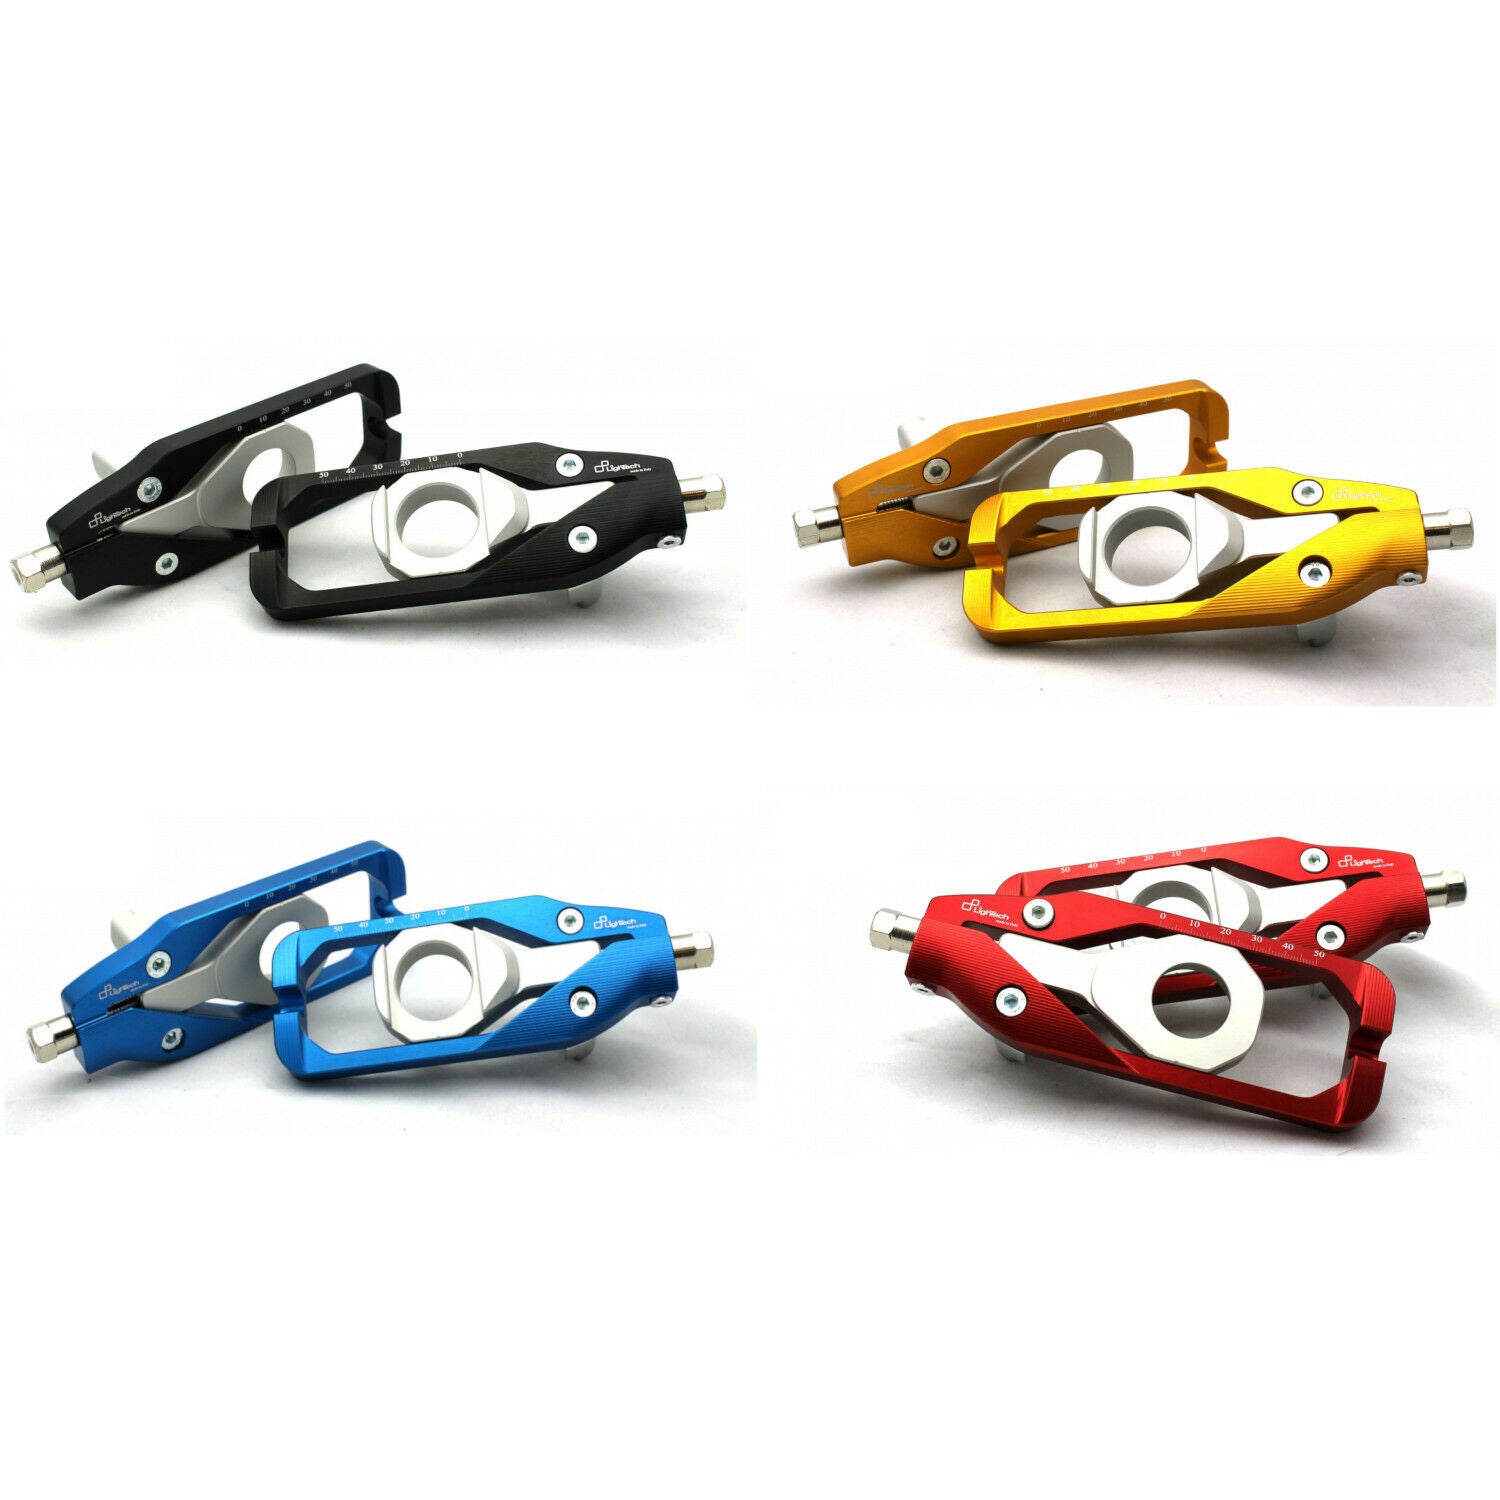 Lightech Yamaha YZF-R1 FZ-10 MT-10 Tensioner Chain Adjusters (4 Colors)